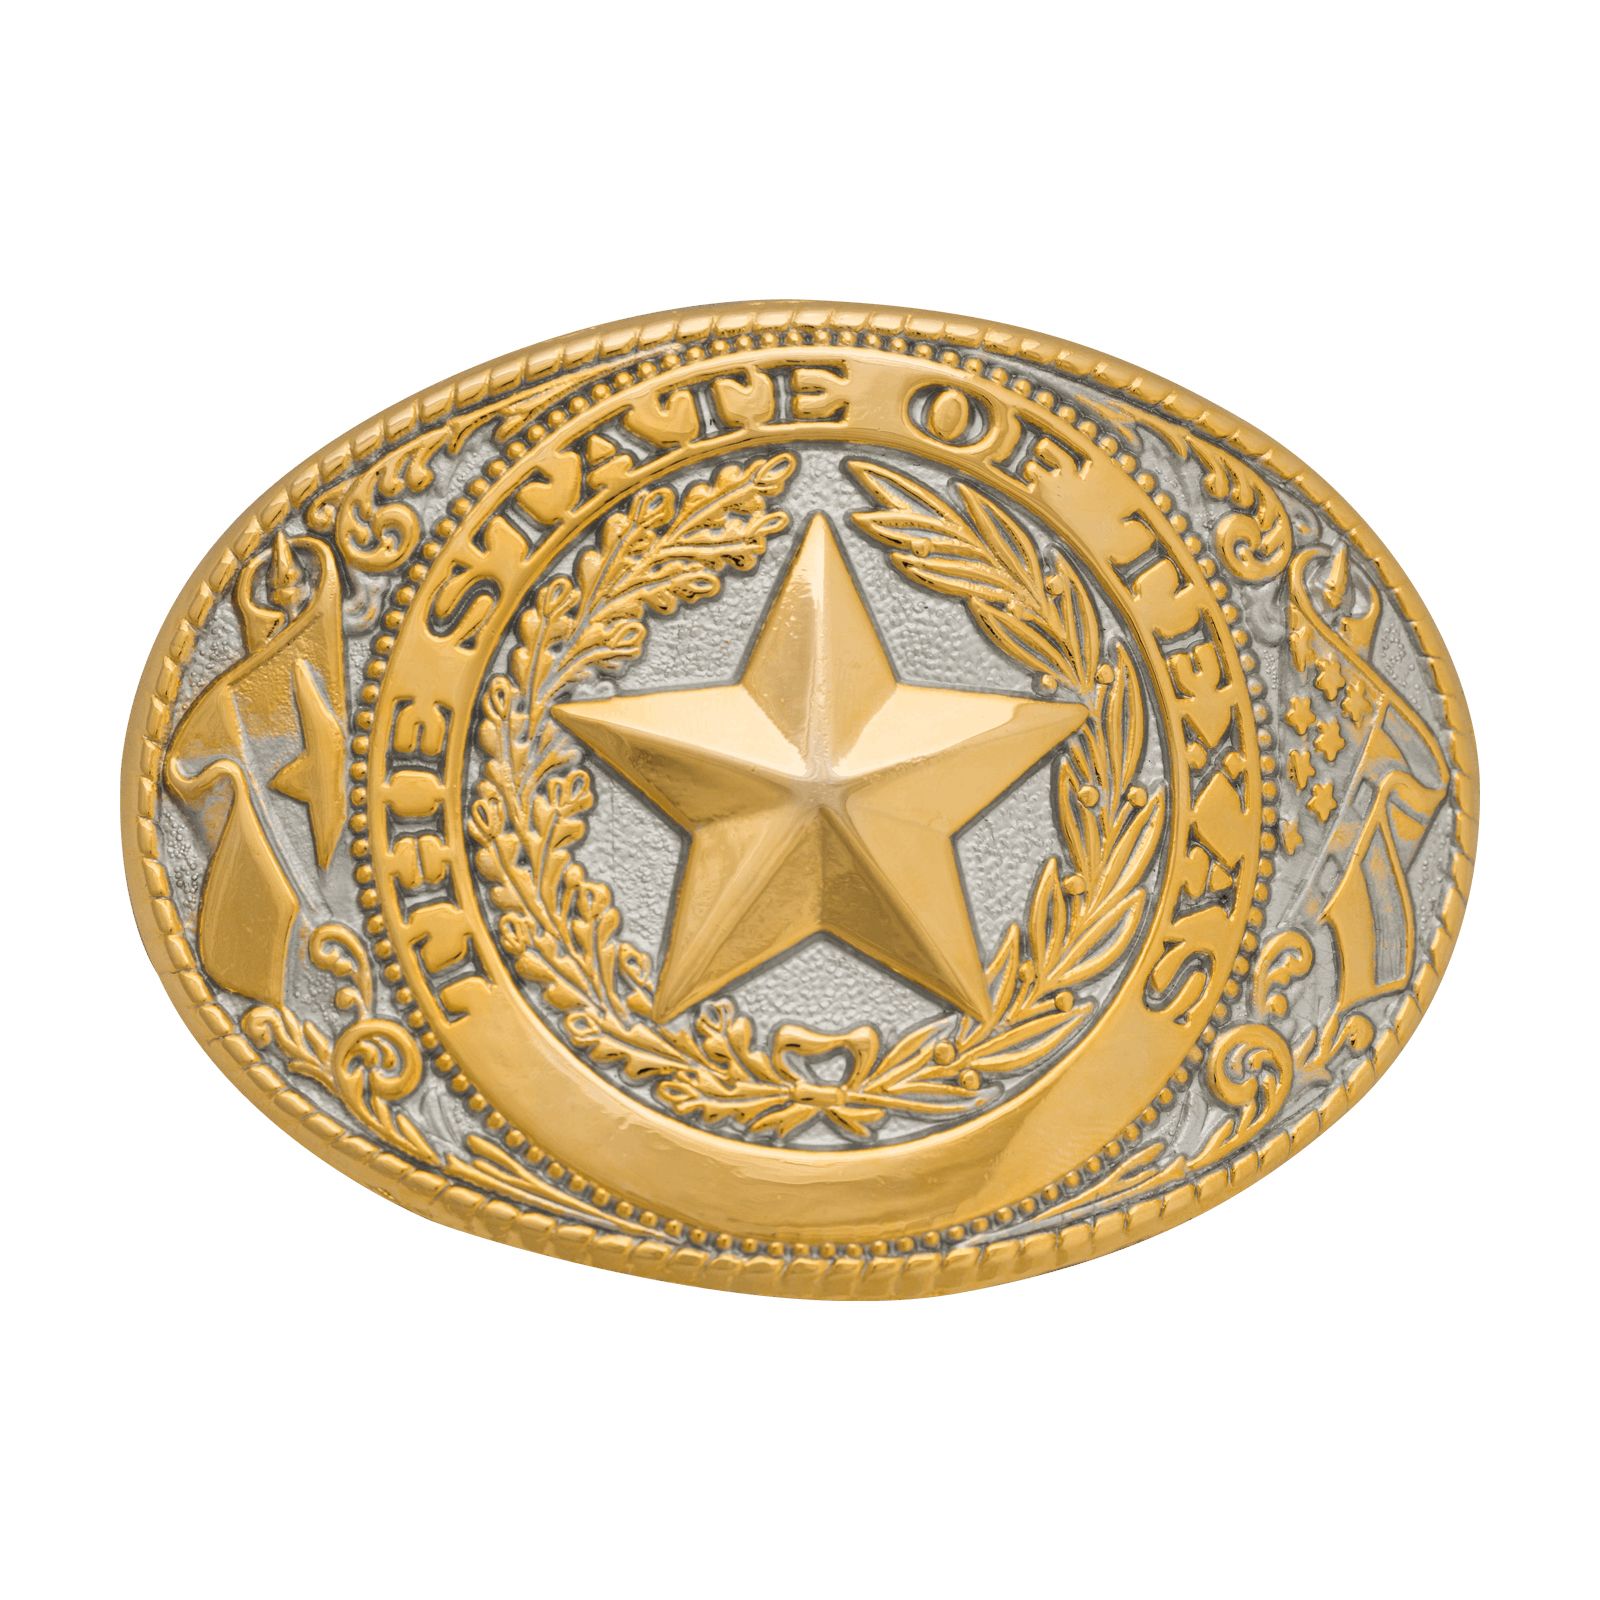 TEXAS STATE SEAL WESTERN BELT BUCKLE 2 3/4 BY 3 3/4 GOLD TONE 